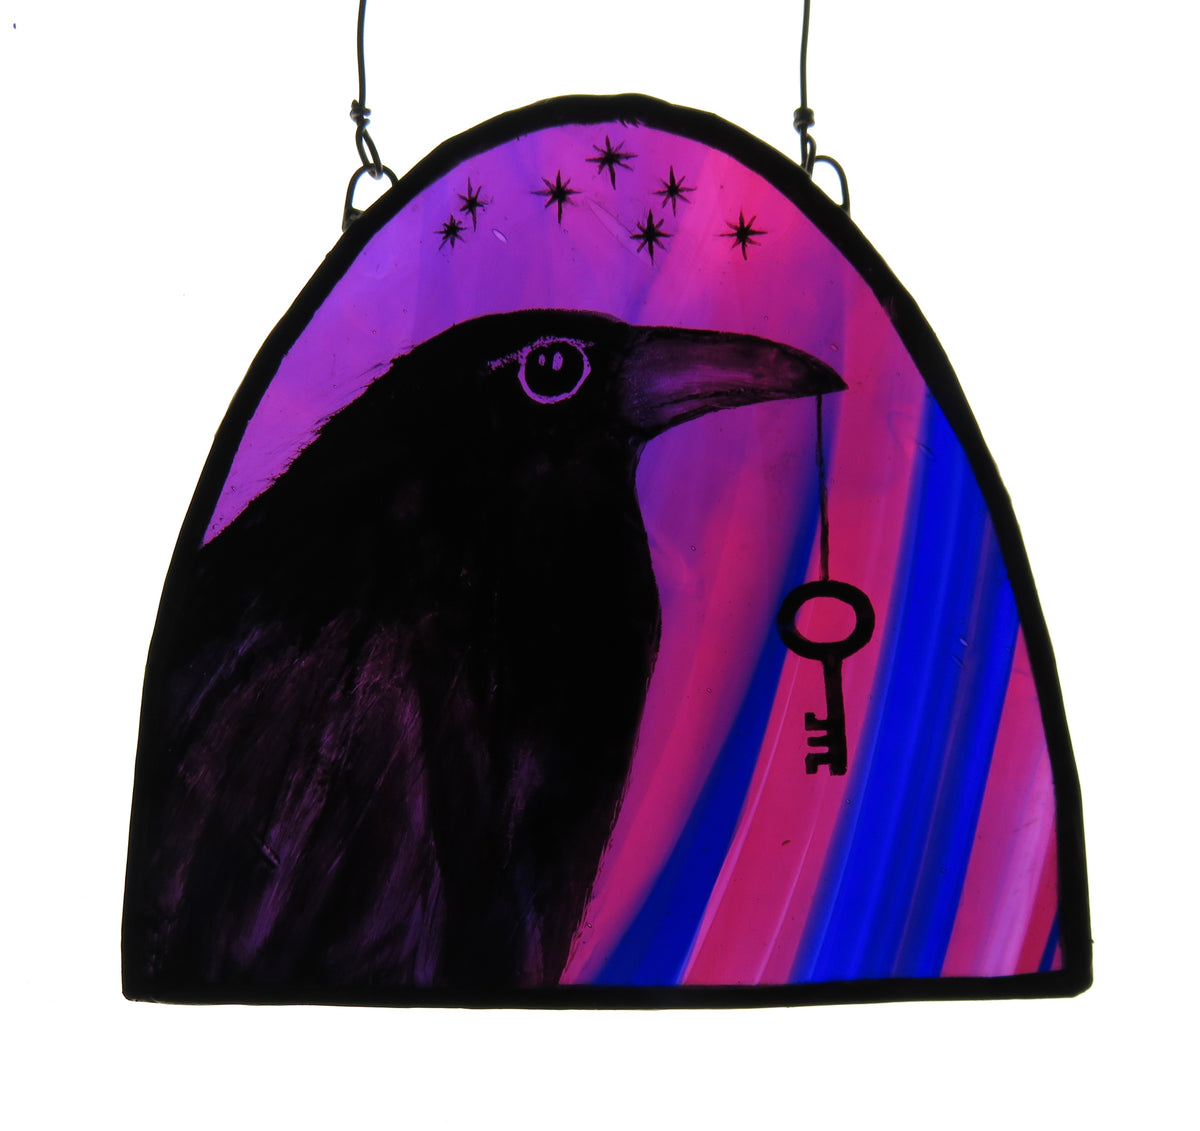 Crow & Key (Large Pink) - Stained Glass Panel by Debra Eden